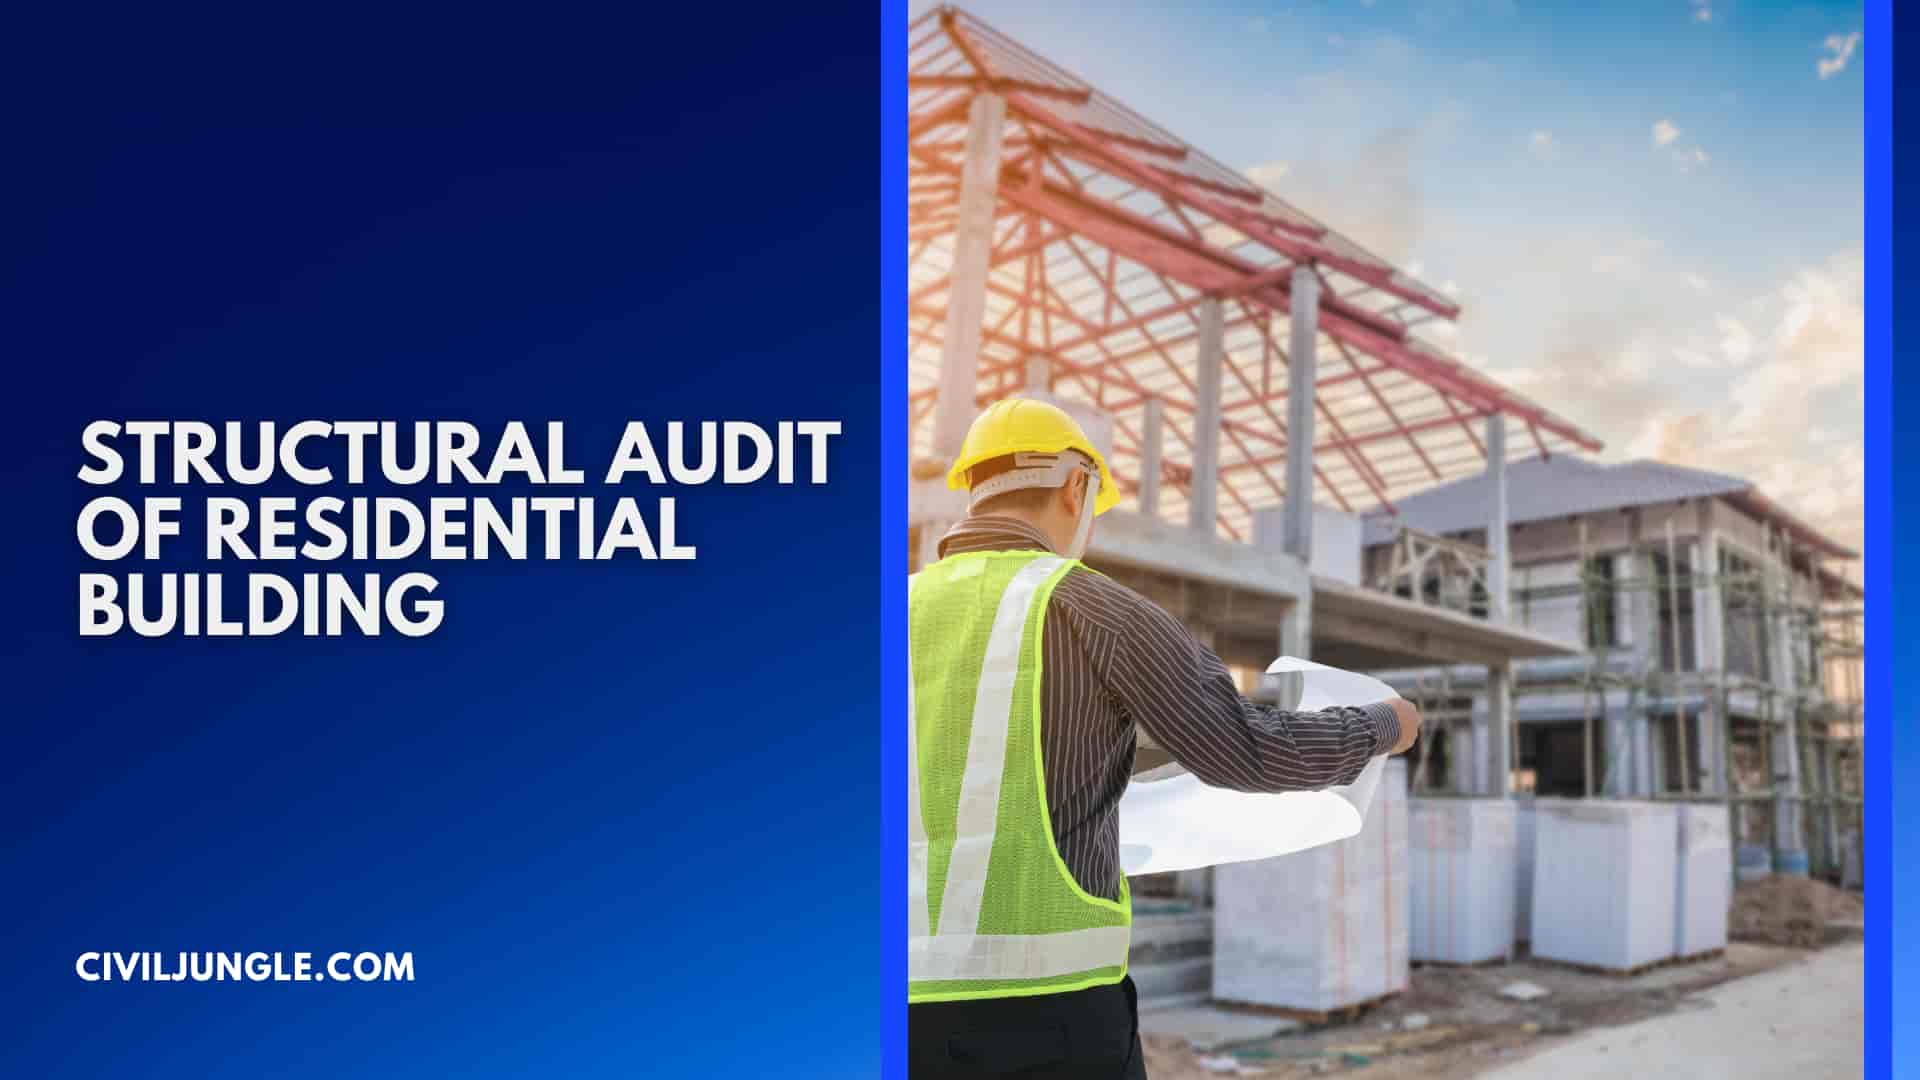 Structural Audit of Residential Building